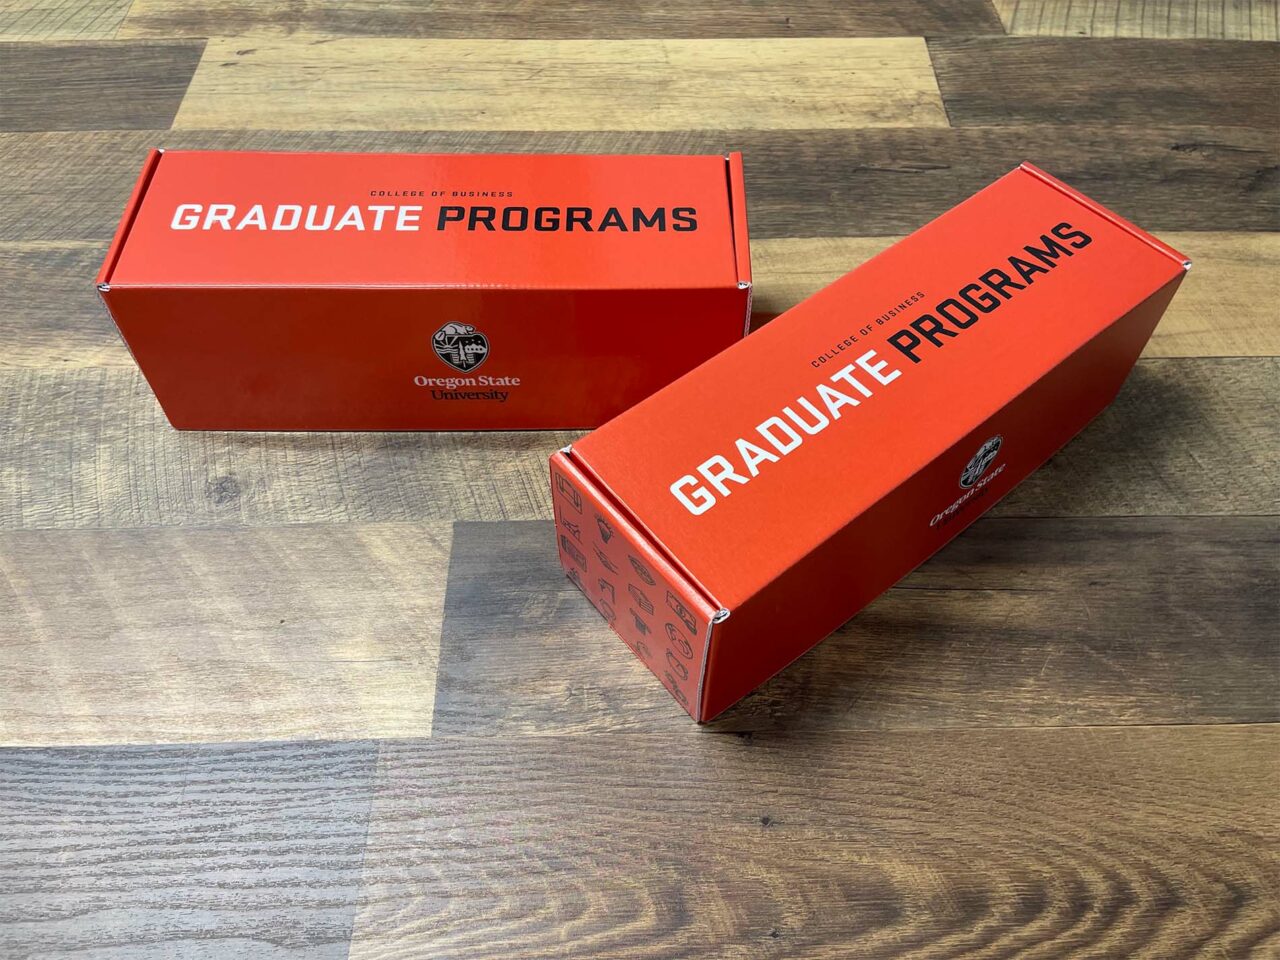 Example of Morel's packaging capabilities, showing a custom branded cardboard box for the OSU Graduate Program